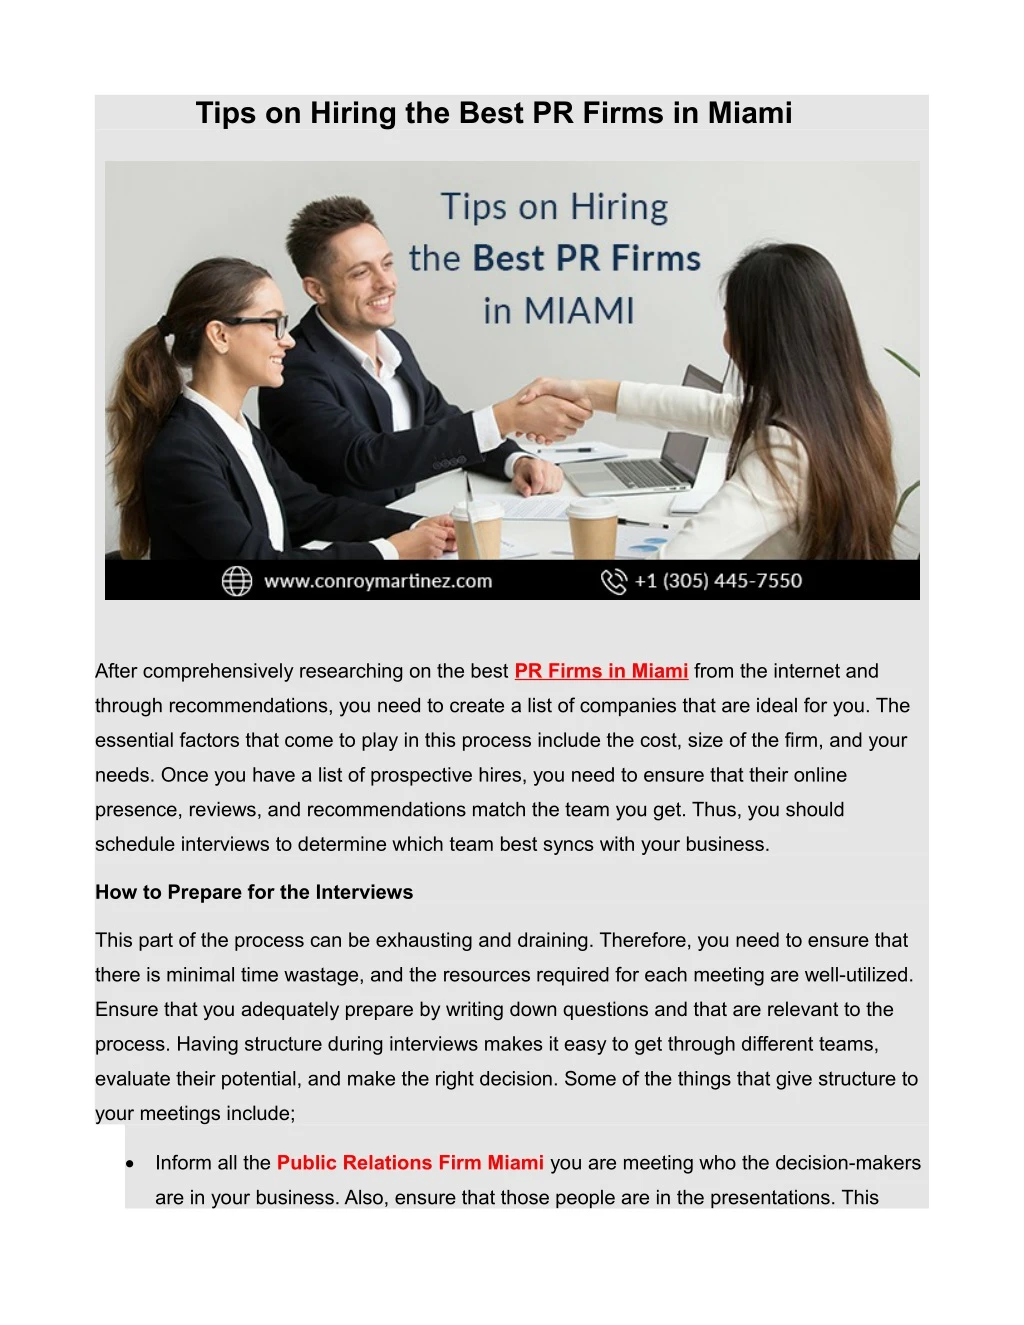 tips on hiring the best pr firms in miami